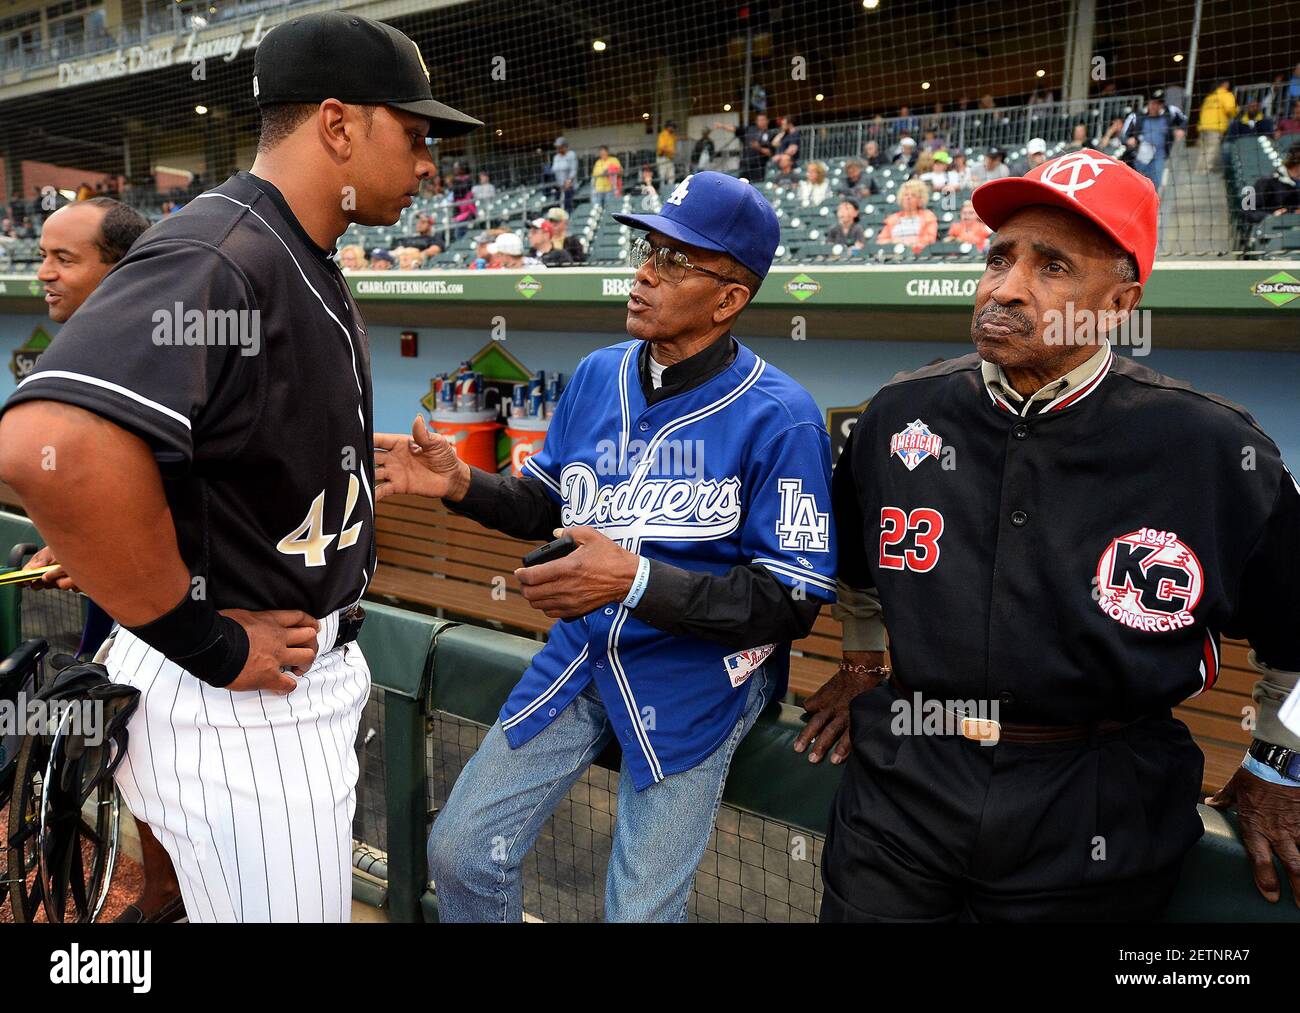 The Charlotte Knights' Tyler Ladendorf, left, listens to former Negro  League player Bill Cathcart, center, as Sam Allen, right, looks on prior to  the Knights' game against the Pawtucket Red Sox at